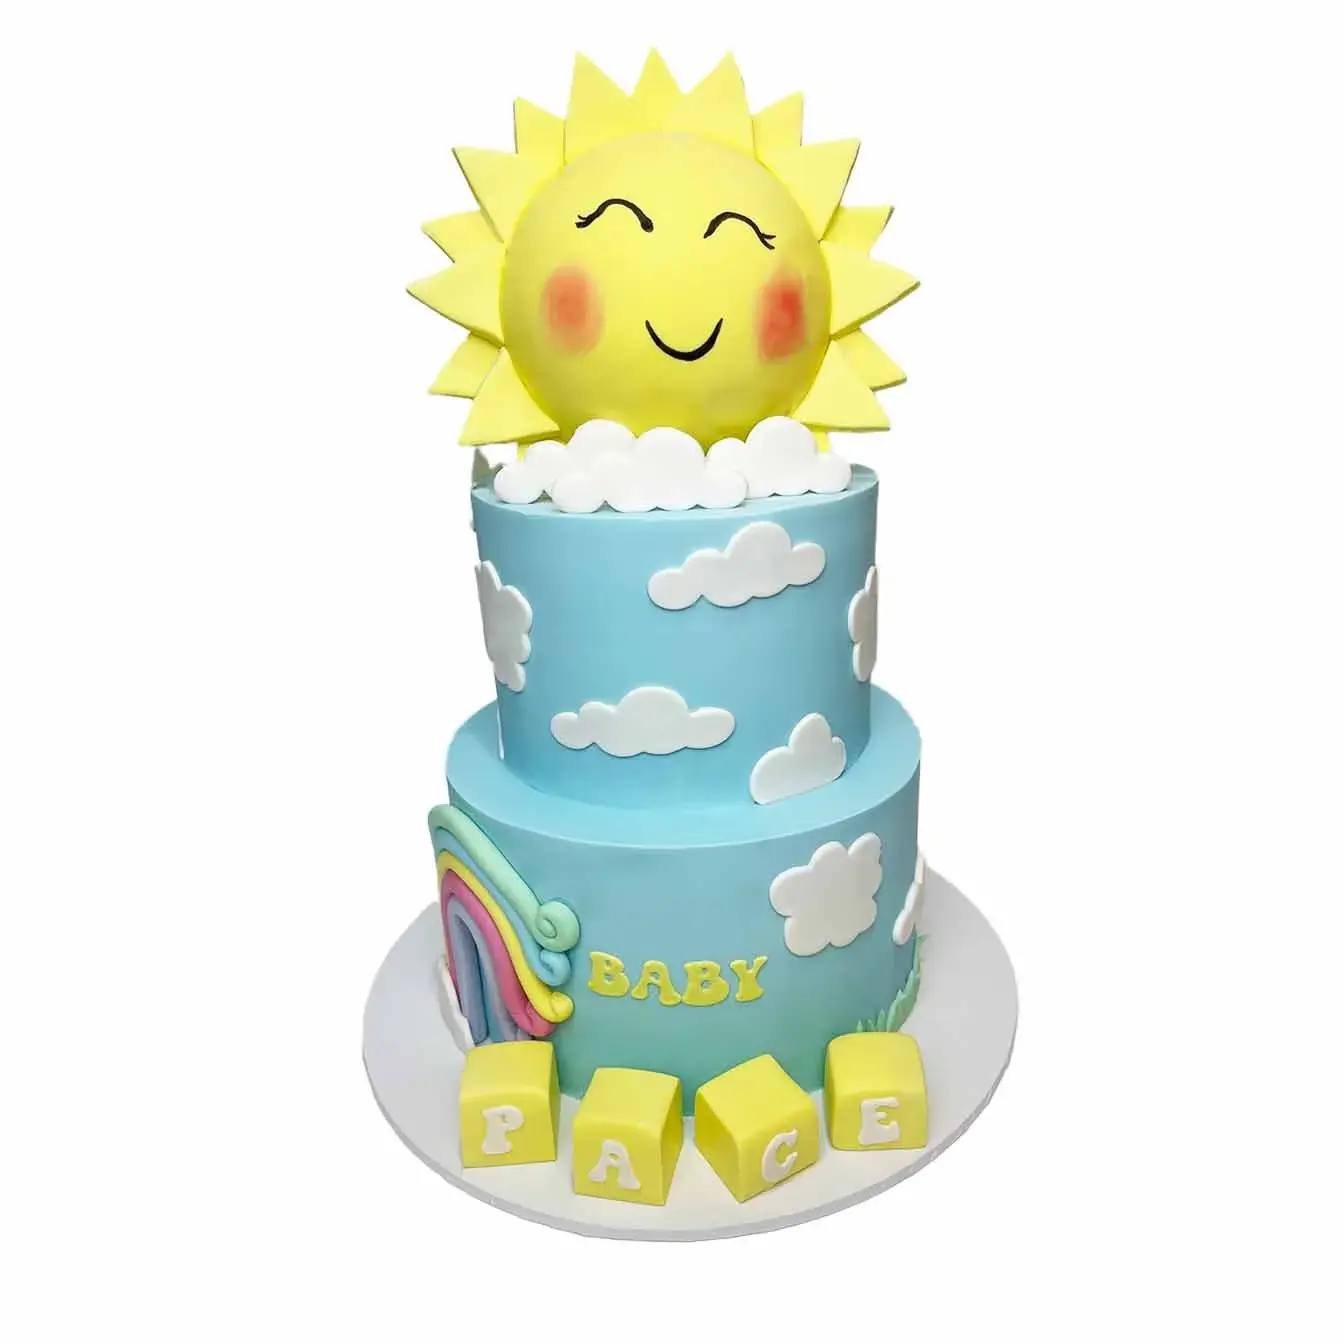 Ray of Sunshine Baby Shower Cake - A two-tier blue fondant cake with cutout clouds, baby name blocks, and a moulded round smiling sun on top, a delightful centerpiece for a joyous baby shower celebration.